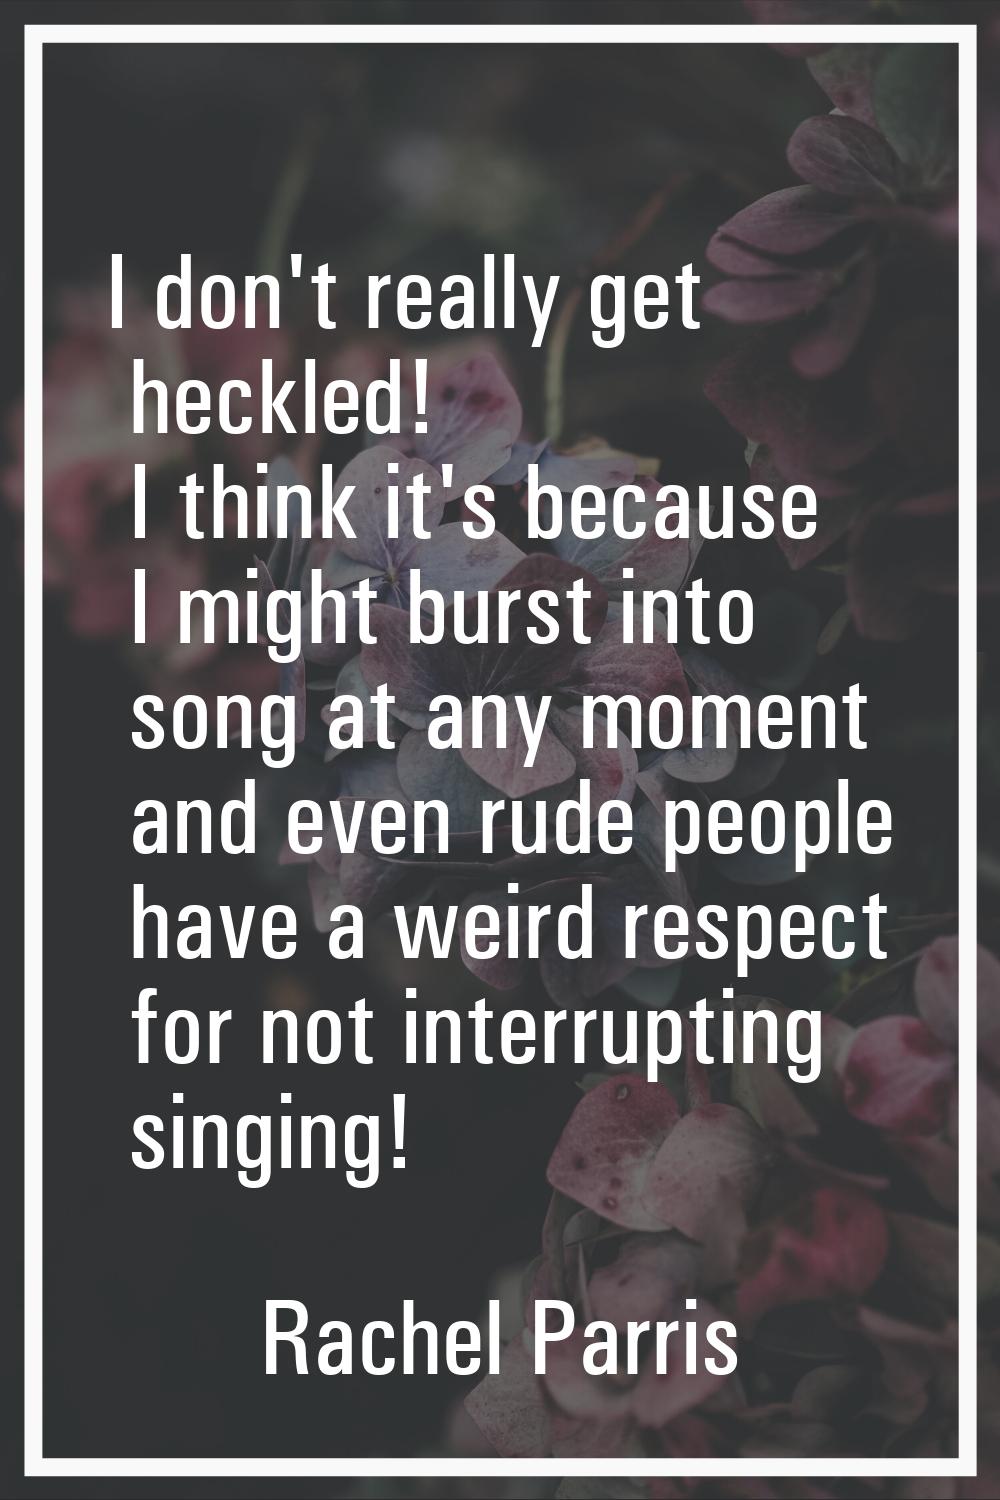 I don't really get heckled! I think it's because I might burst into song at any moment and even rud